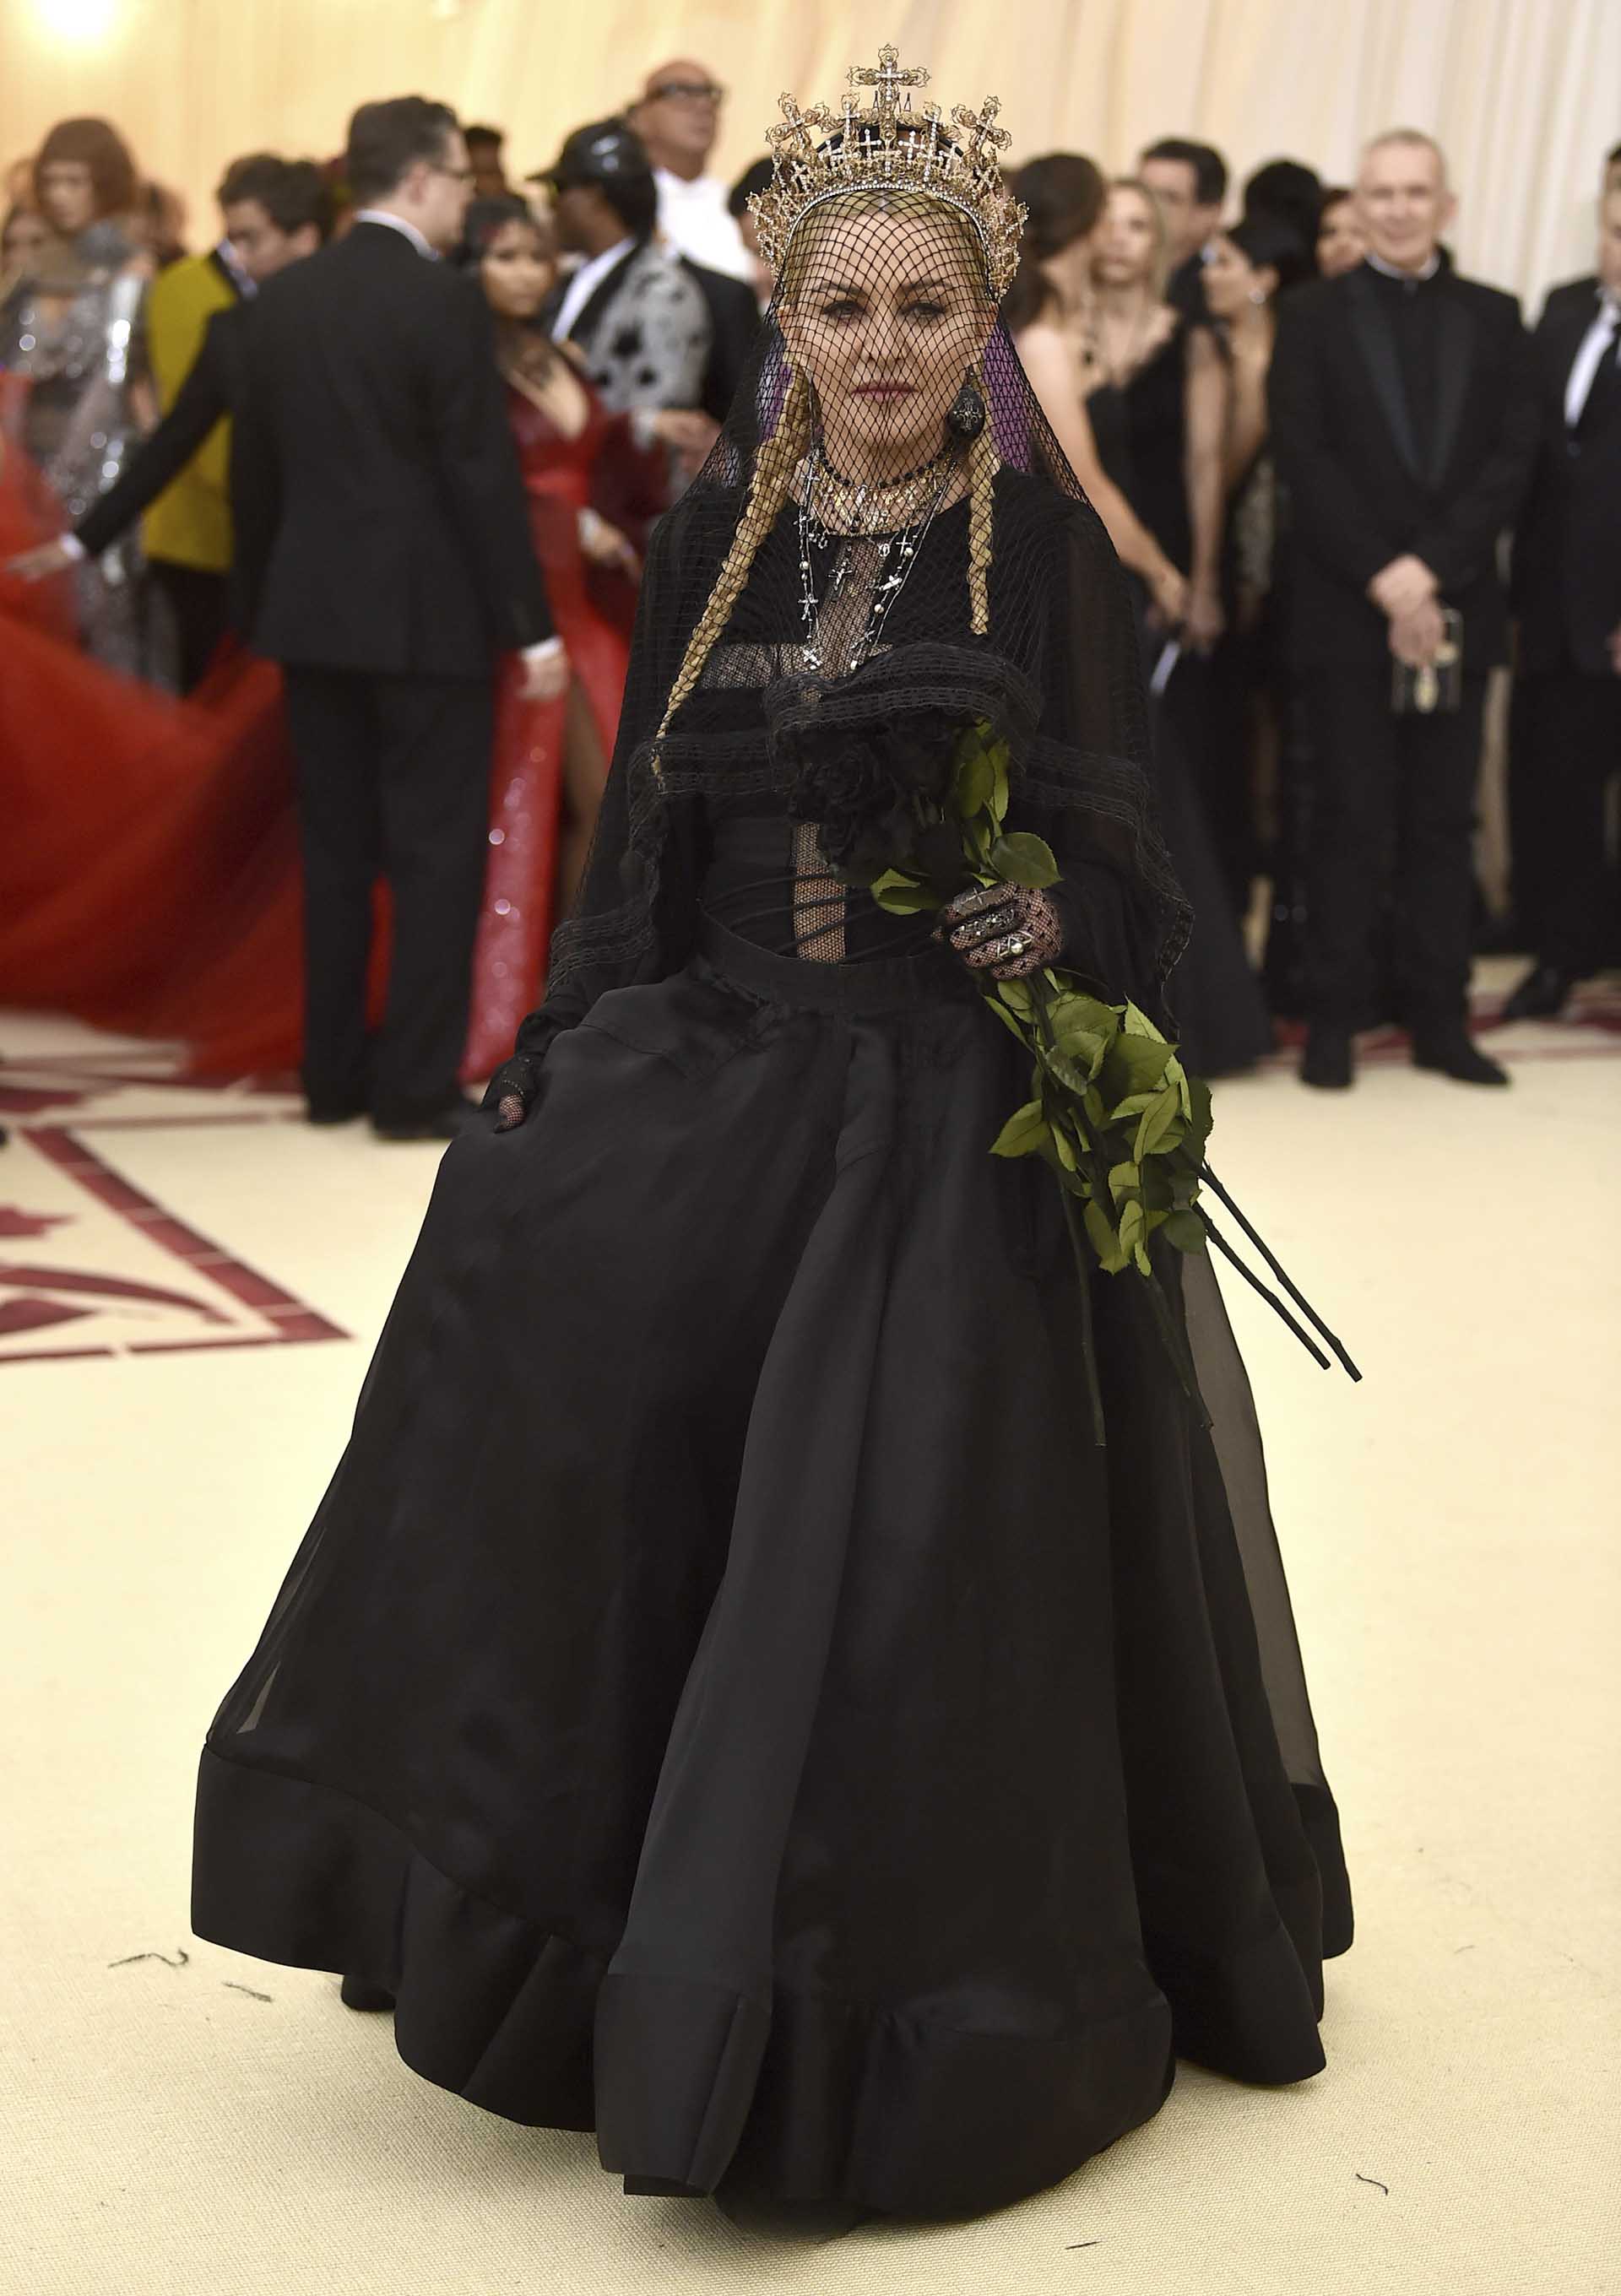 Singer Madonna at the Metropolitan Museum of Art Costume Institute Gala (Met Gala) to celebrate the opening of "Heavenly Bodies: Fashion and the Catholic Imagination" in New York, U.S., May 7, 2018